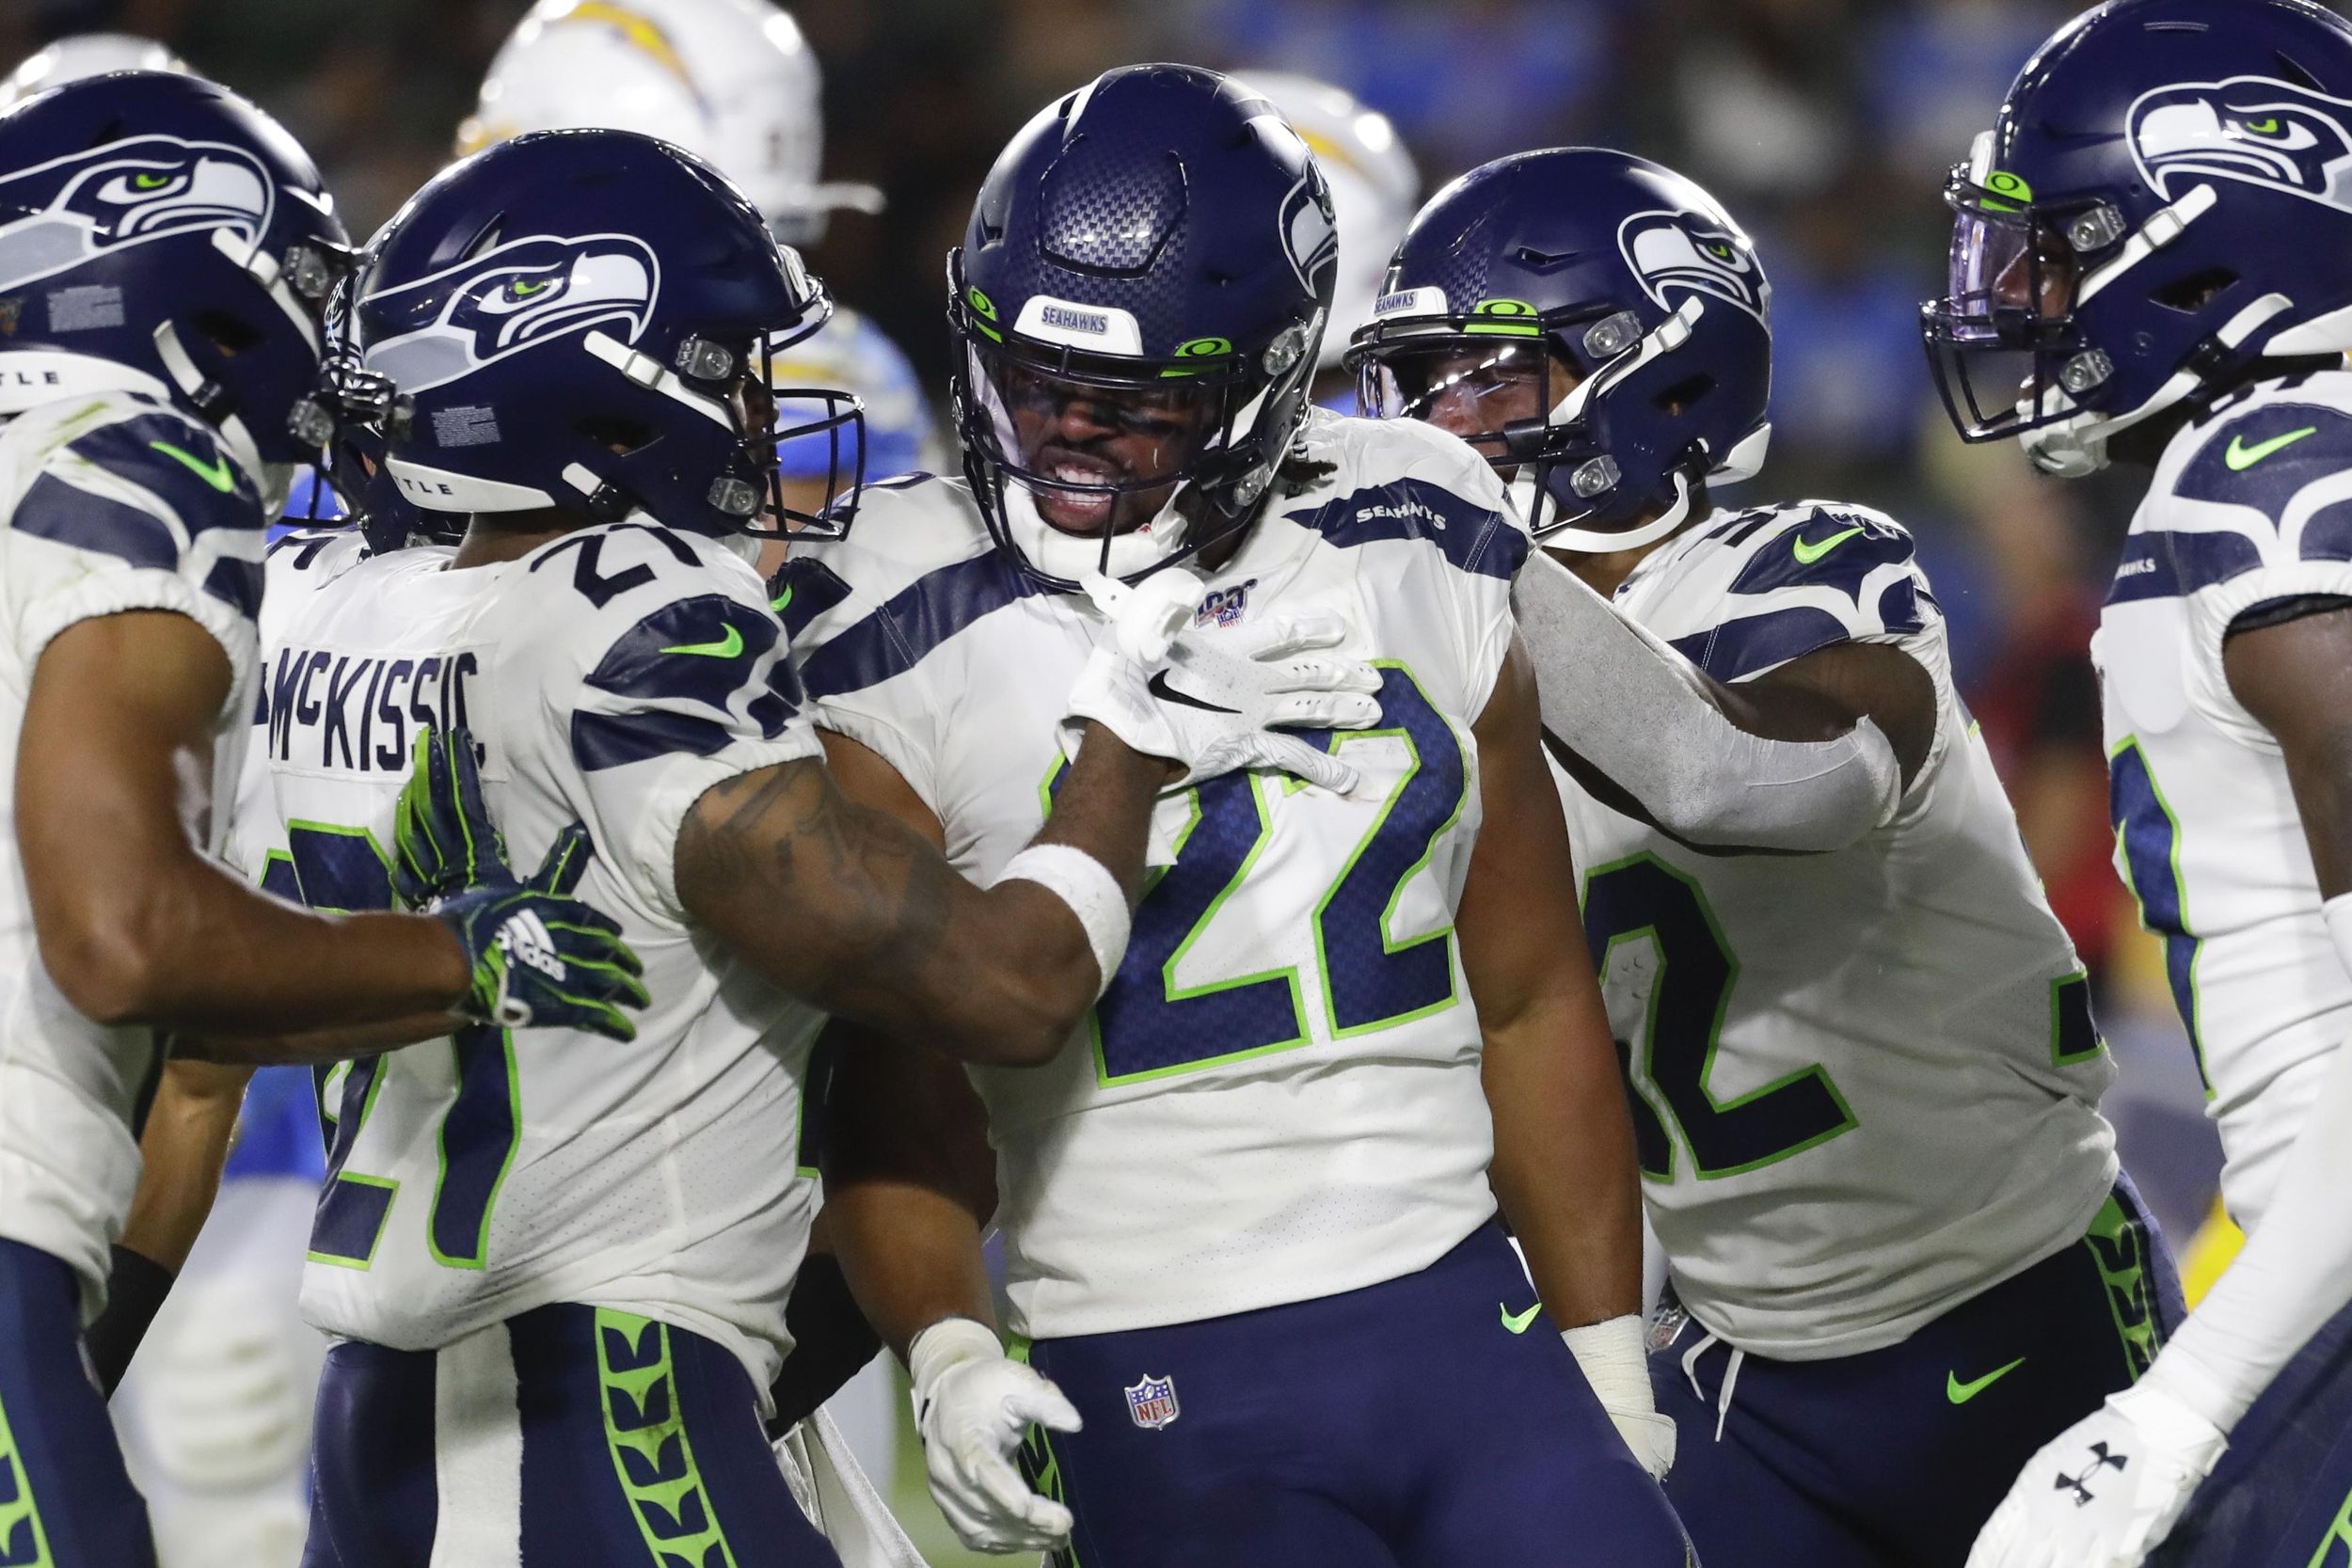 Is Seahawks running back C.J. Prosise getting his last chance to prove